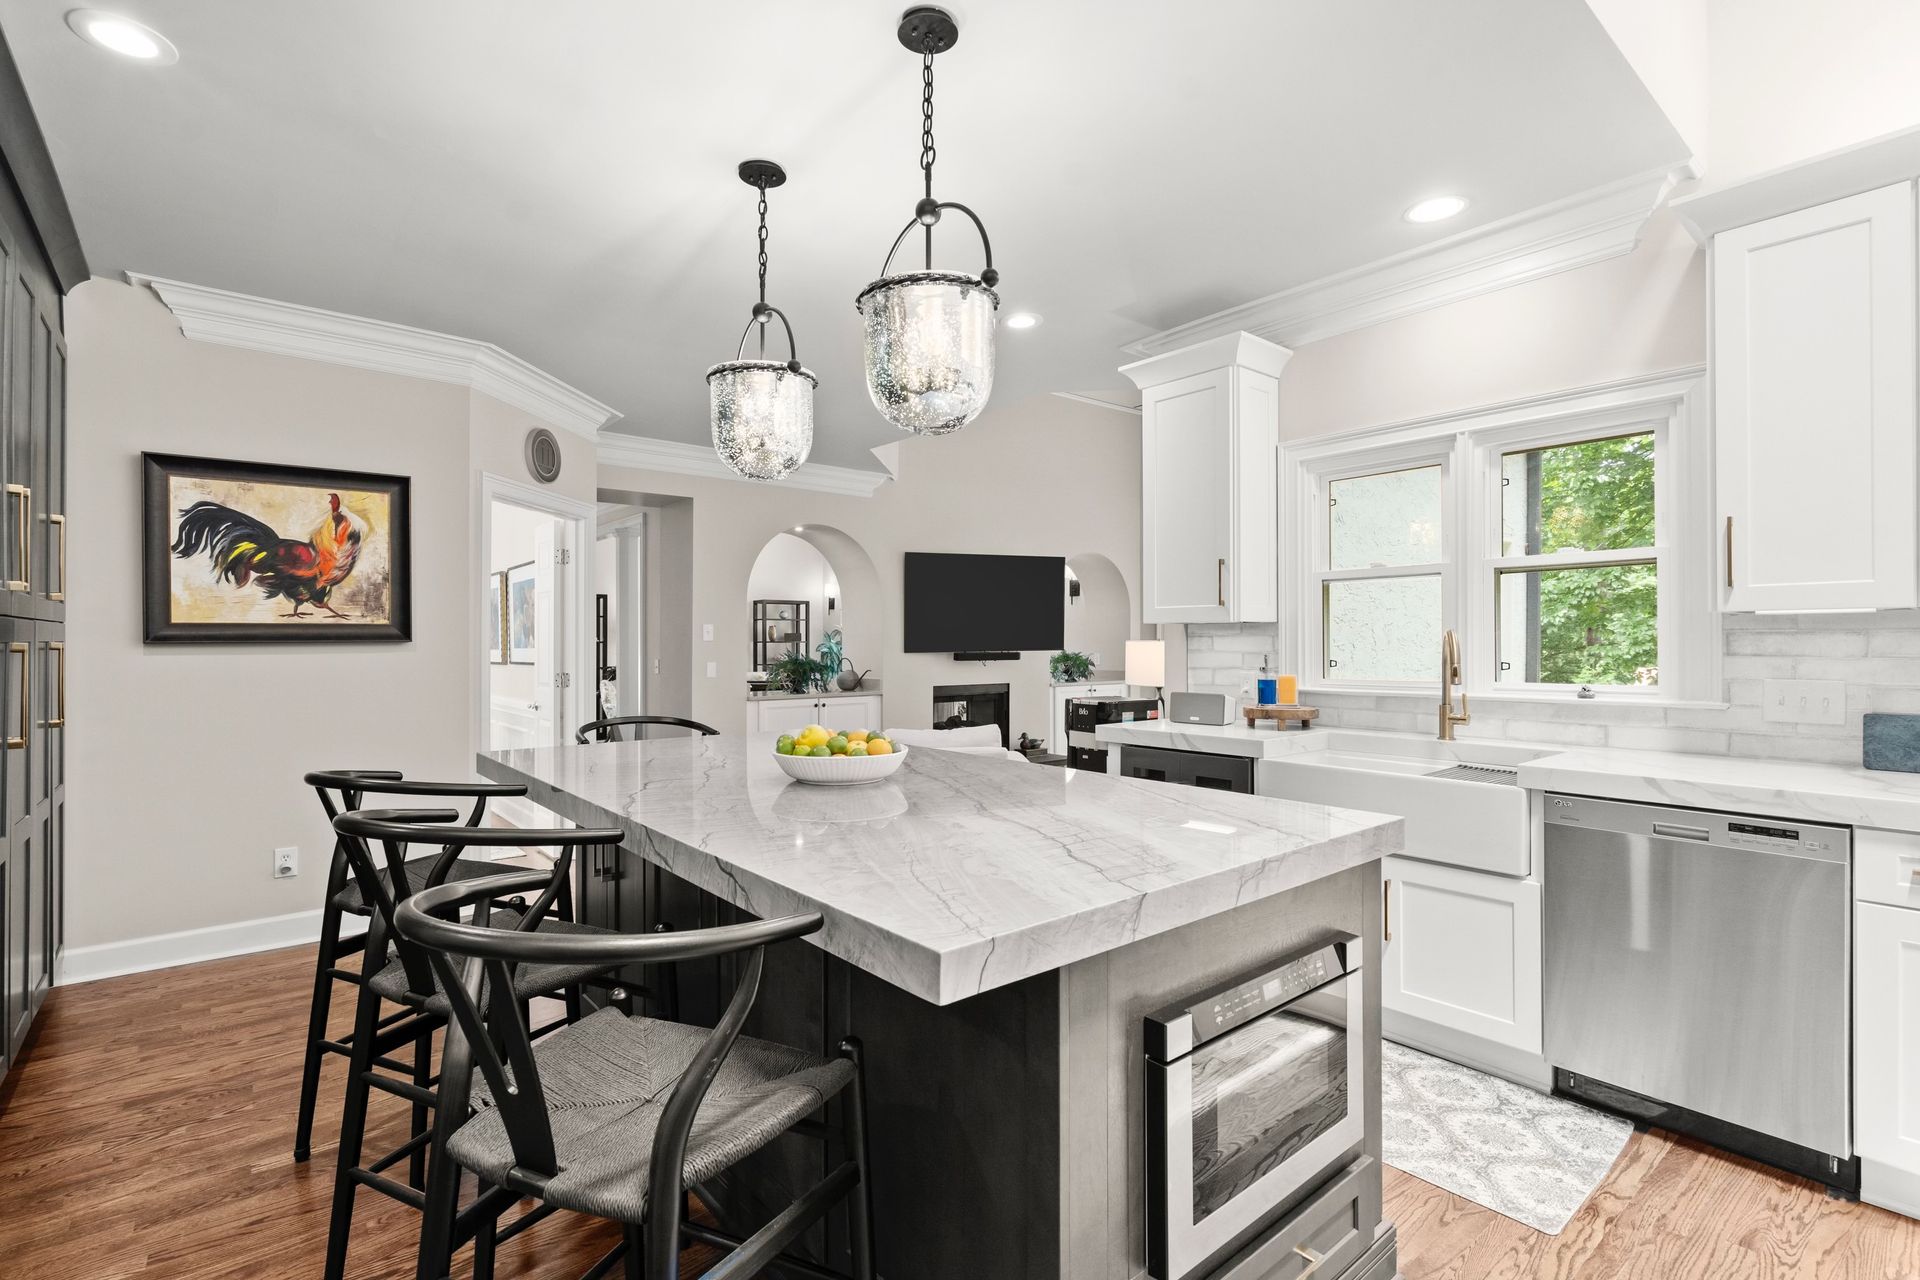 A kitchen with a large island , white cabinets , stainless steel appliances , and hardwood floors.